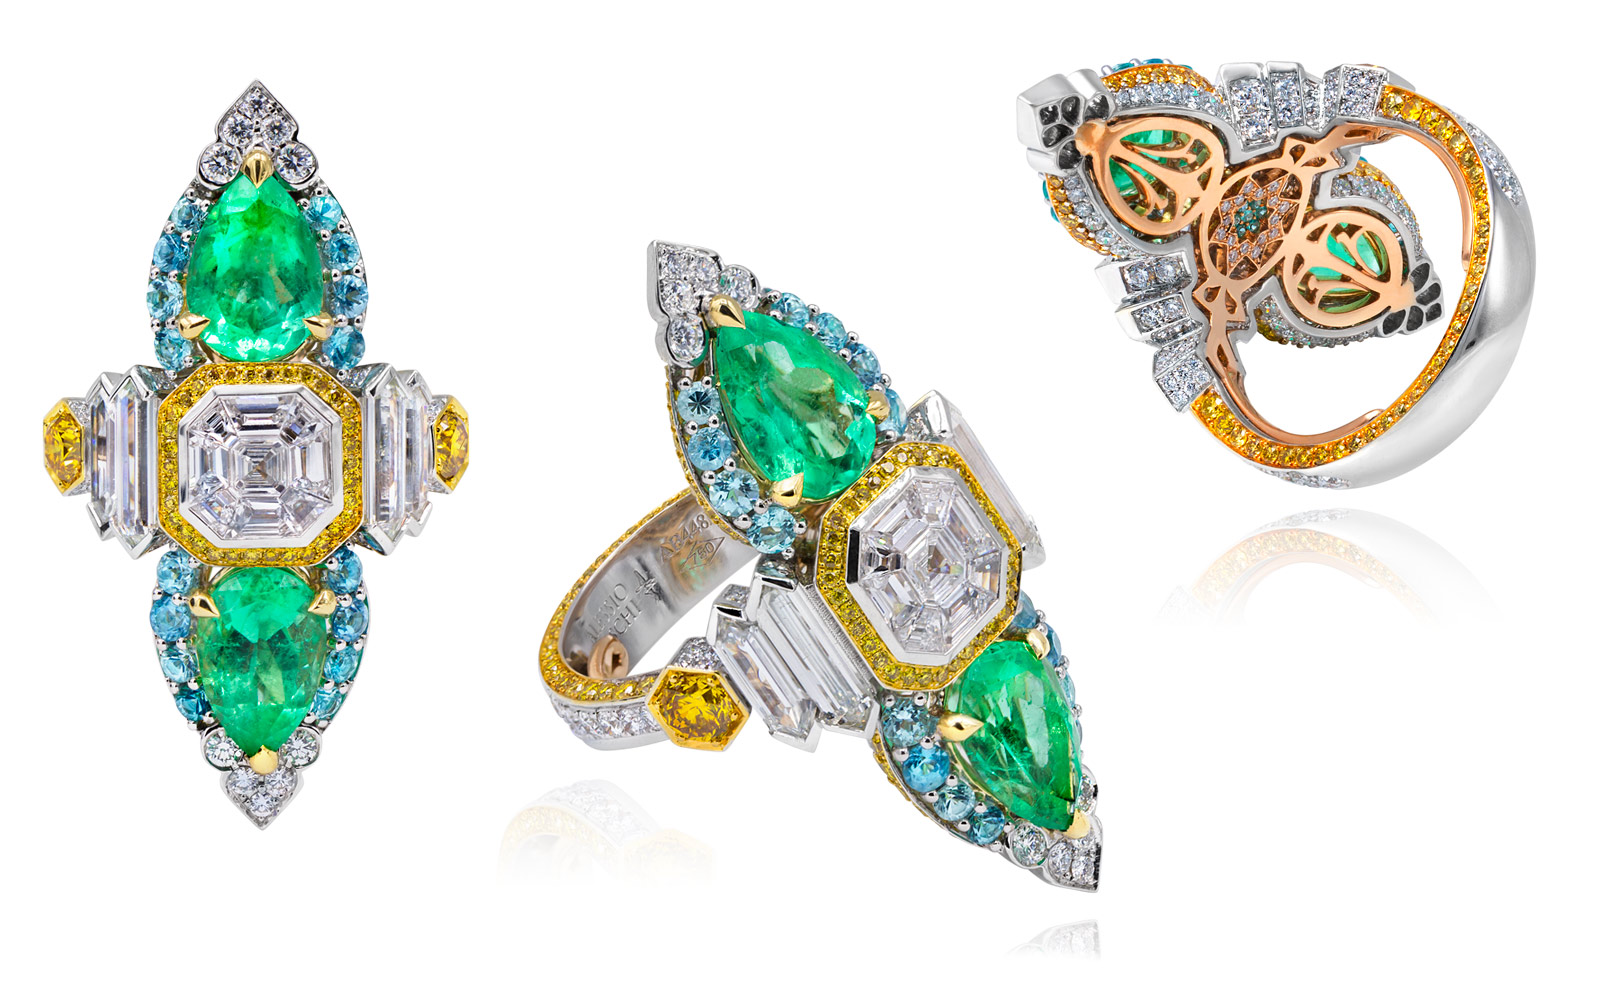 Alessio Boschi Peacock Dance ring with emeralds, diamonds and Paraiba tourmalines